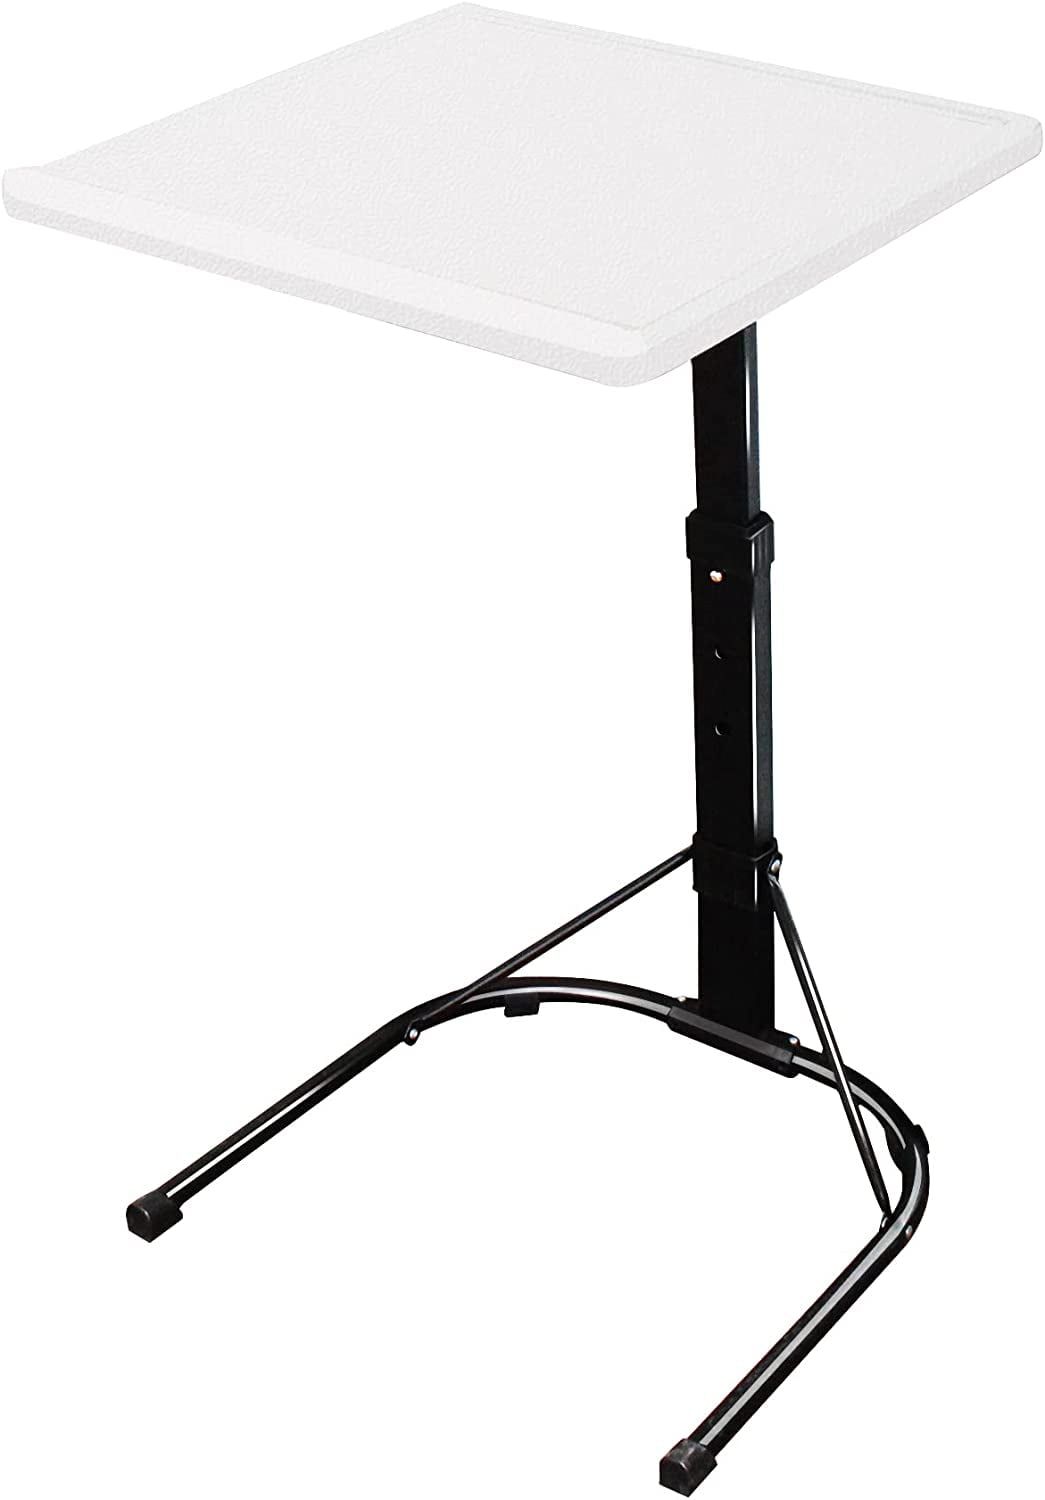 Coveronics Upgrade Folding Tv Tray Table – Adjustable Tv Dinner Table,  Couch Table Trays For Eating, Office, Laptop Stand, Portable Bed Sofa  Dinner Tray With 3 Angles & 3 Height, White – Walmart With Regard To Foldable Portable Adjustable Tv Stands (Photo 9 of 15)